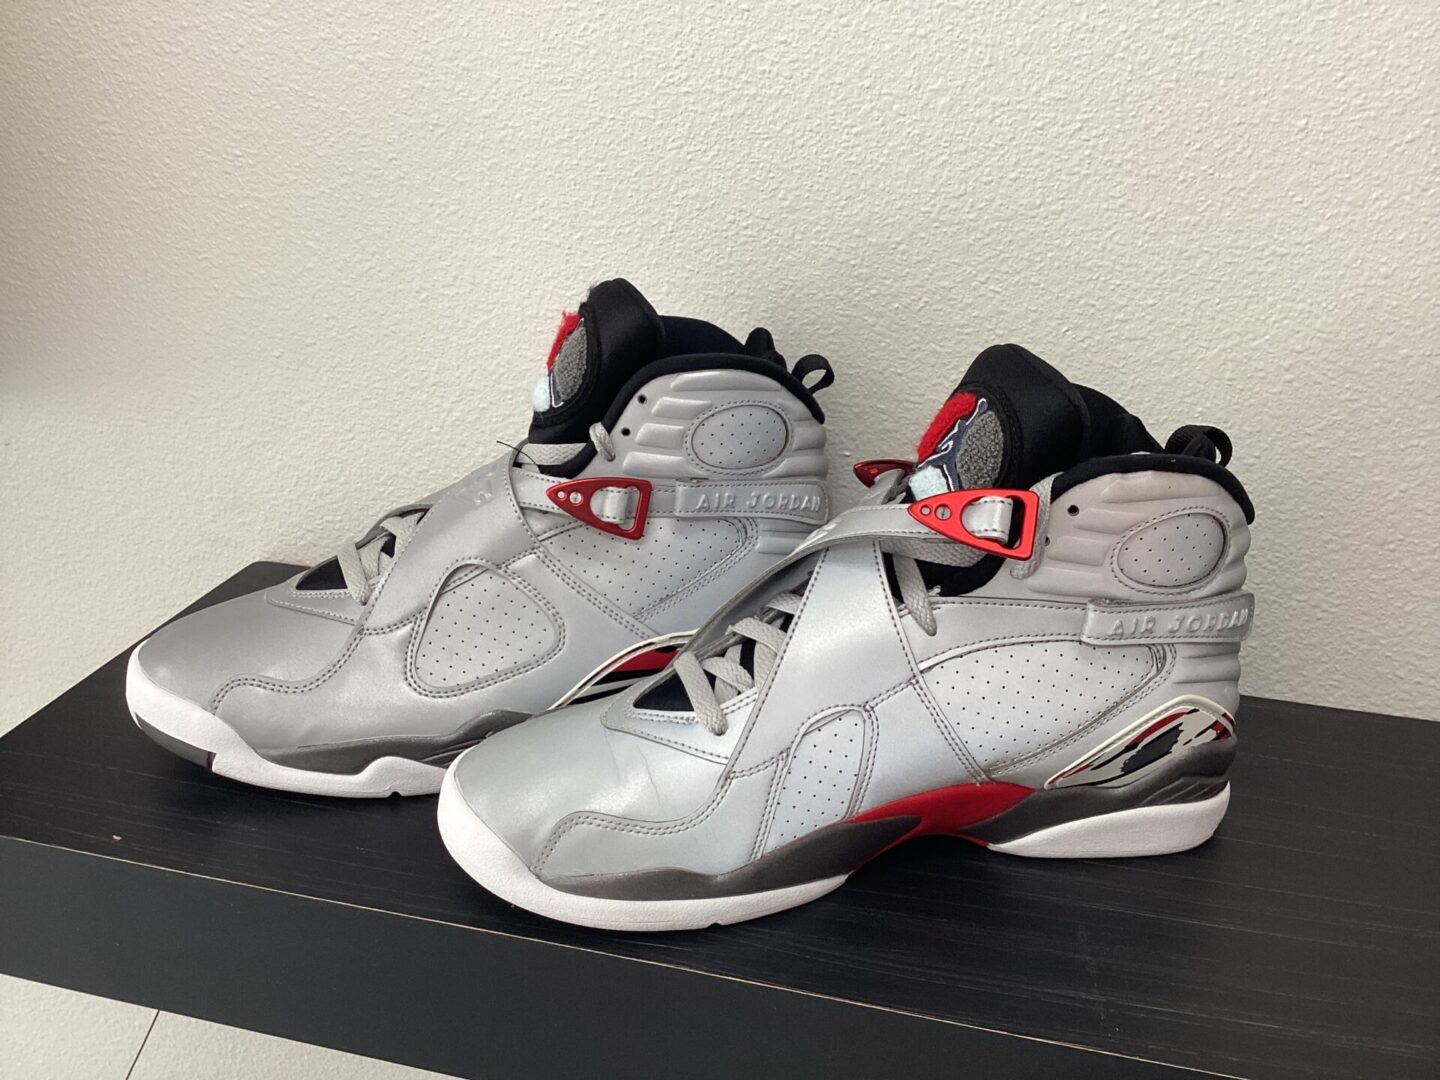 A pair of grey and red high-top sneakers with "Pre owned-Jordan 8" text displayed, resting on a black shelf against a white wall.